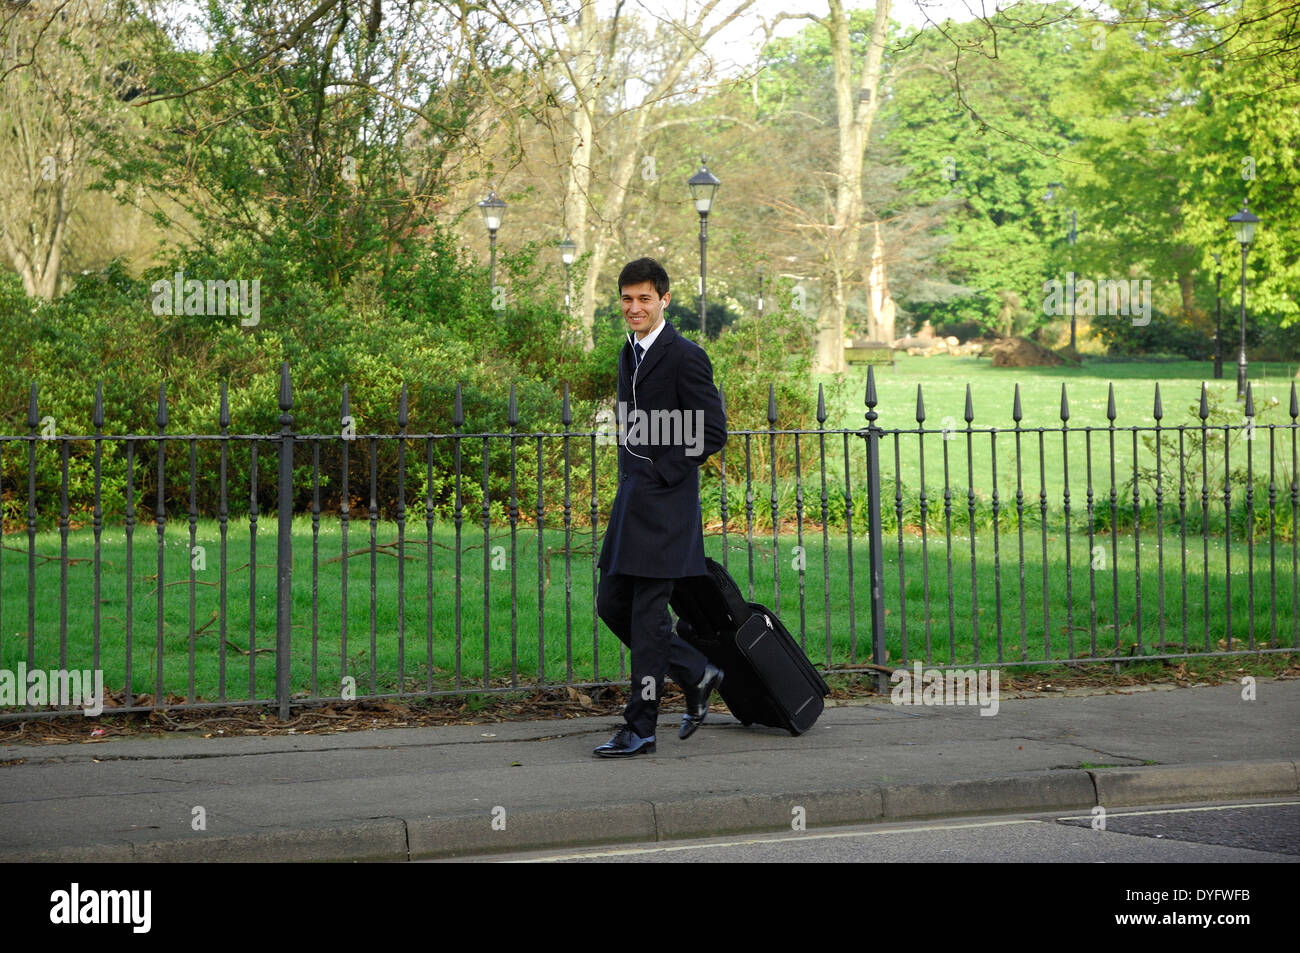 Smartly dressed man pulling luggage in Southampton, England Stock Photo